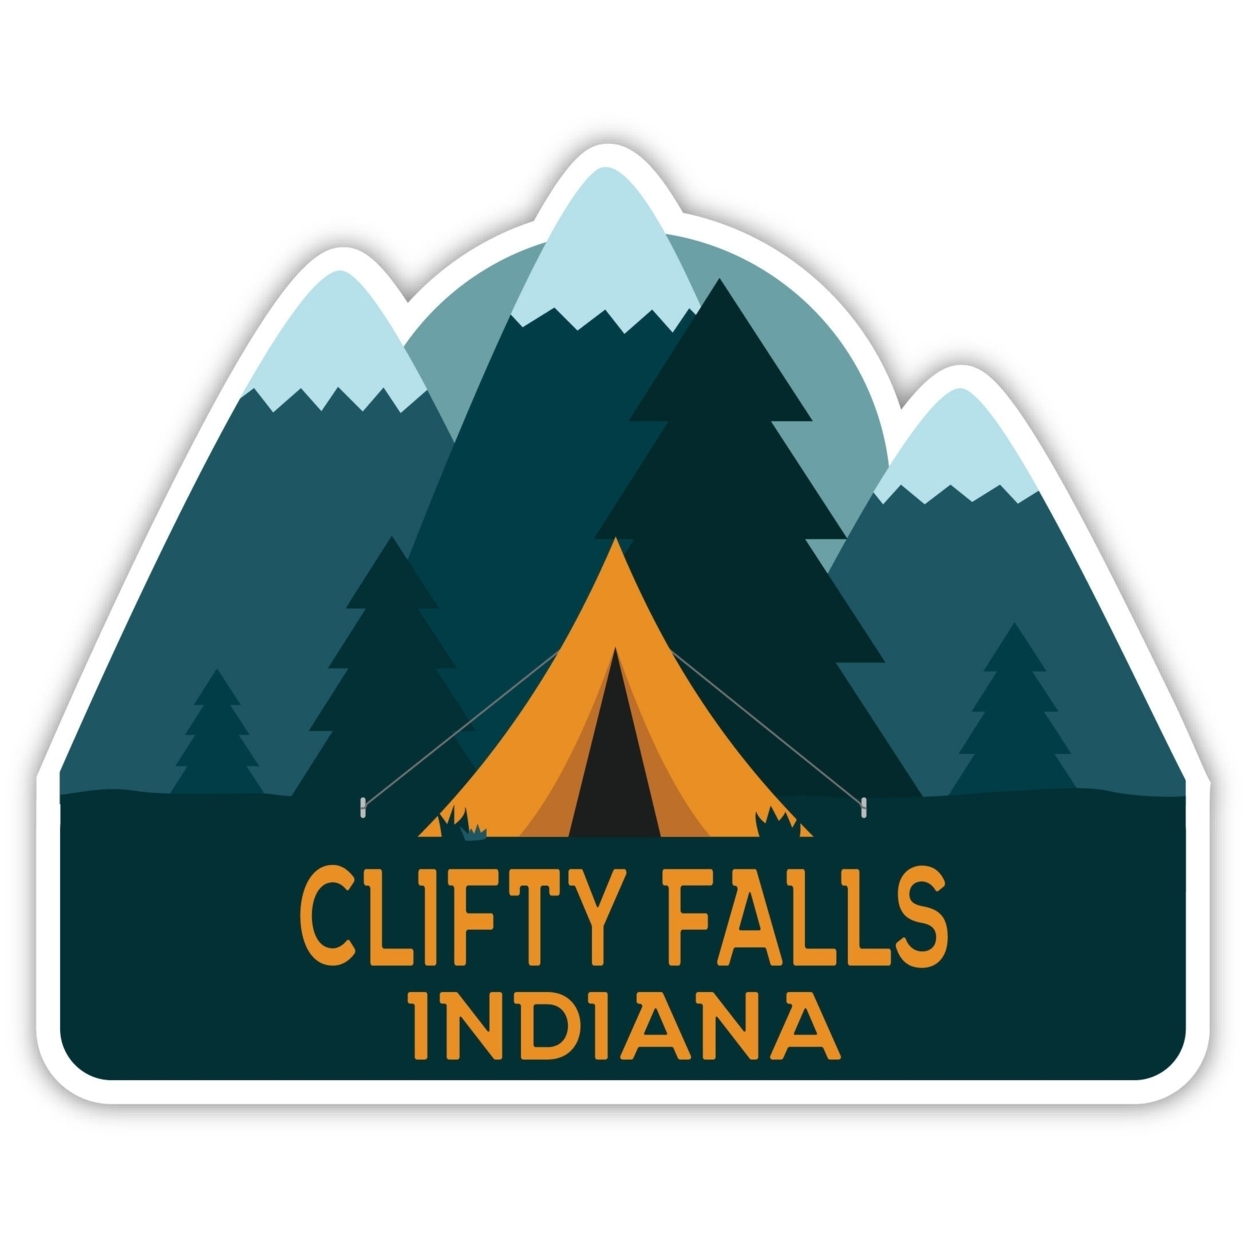 Clifty Falls Indiana Souvenir Decorative Stickers (Choose Theme And Size) - 4-Pack, 6-Inch, Tent